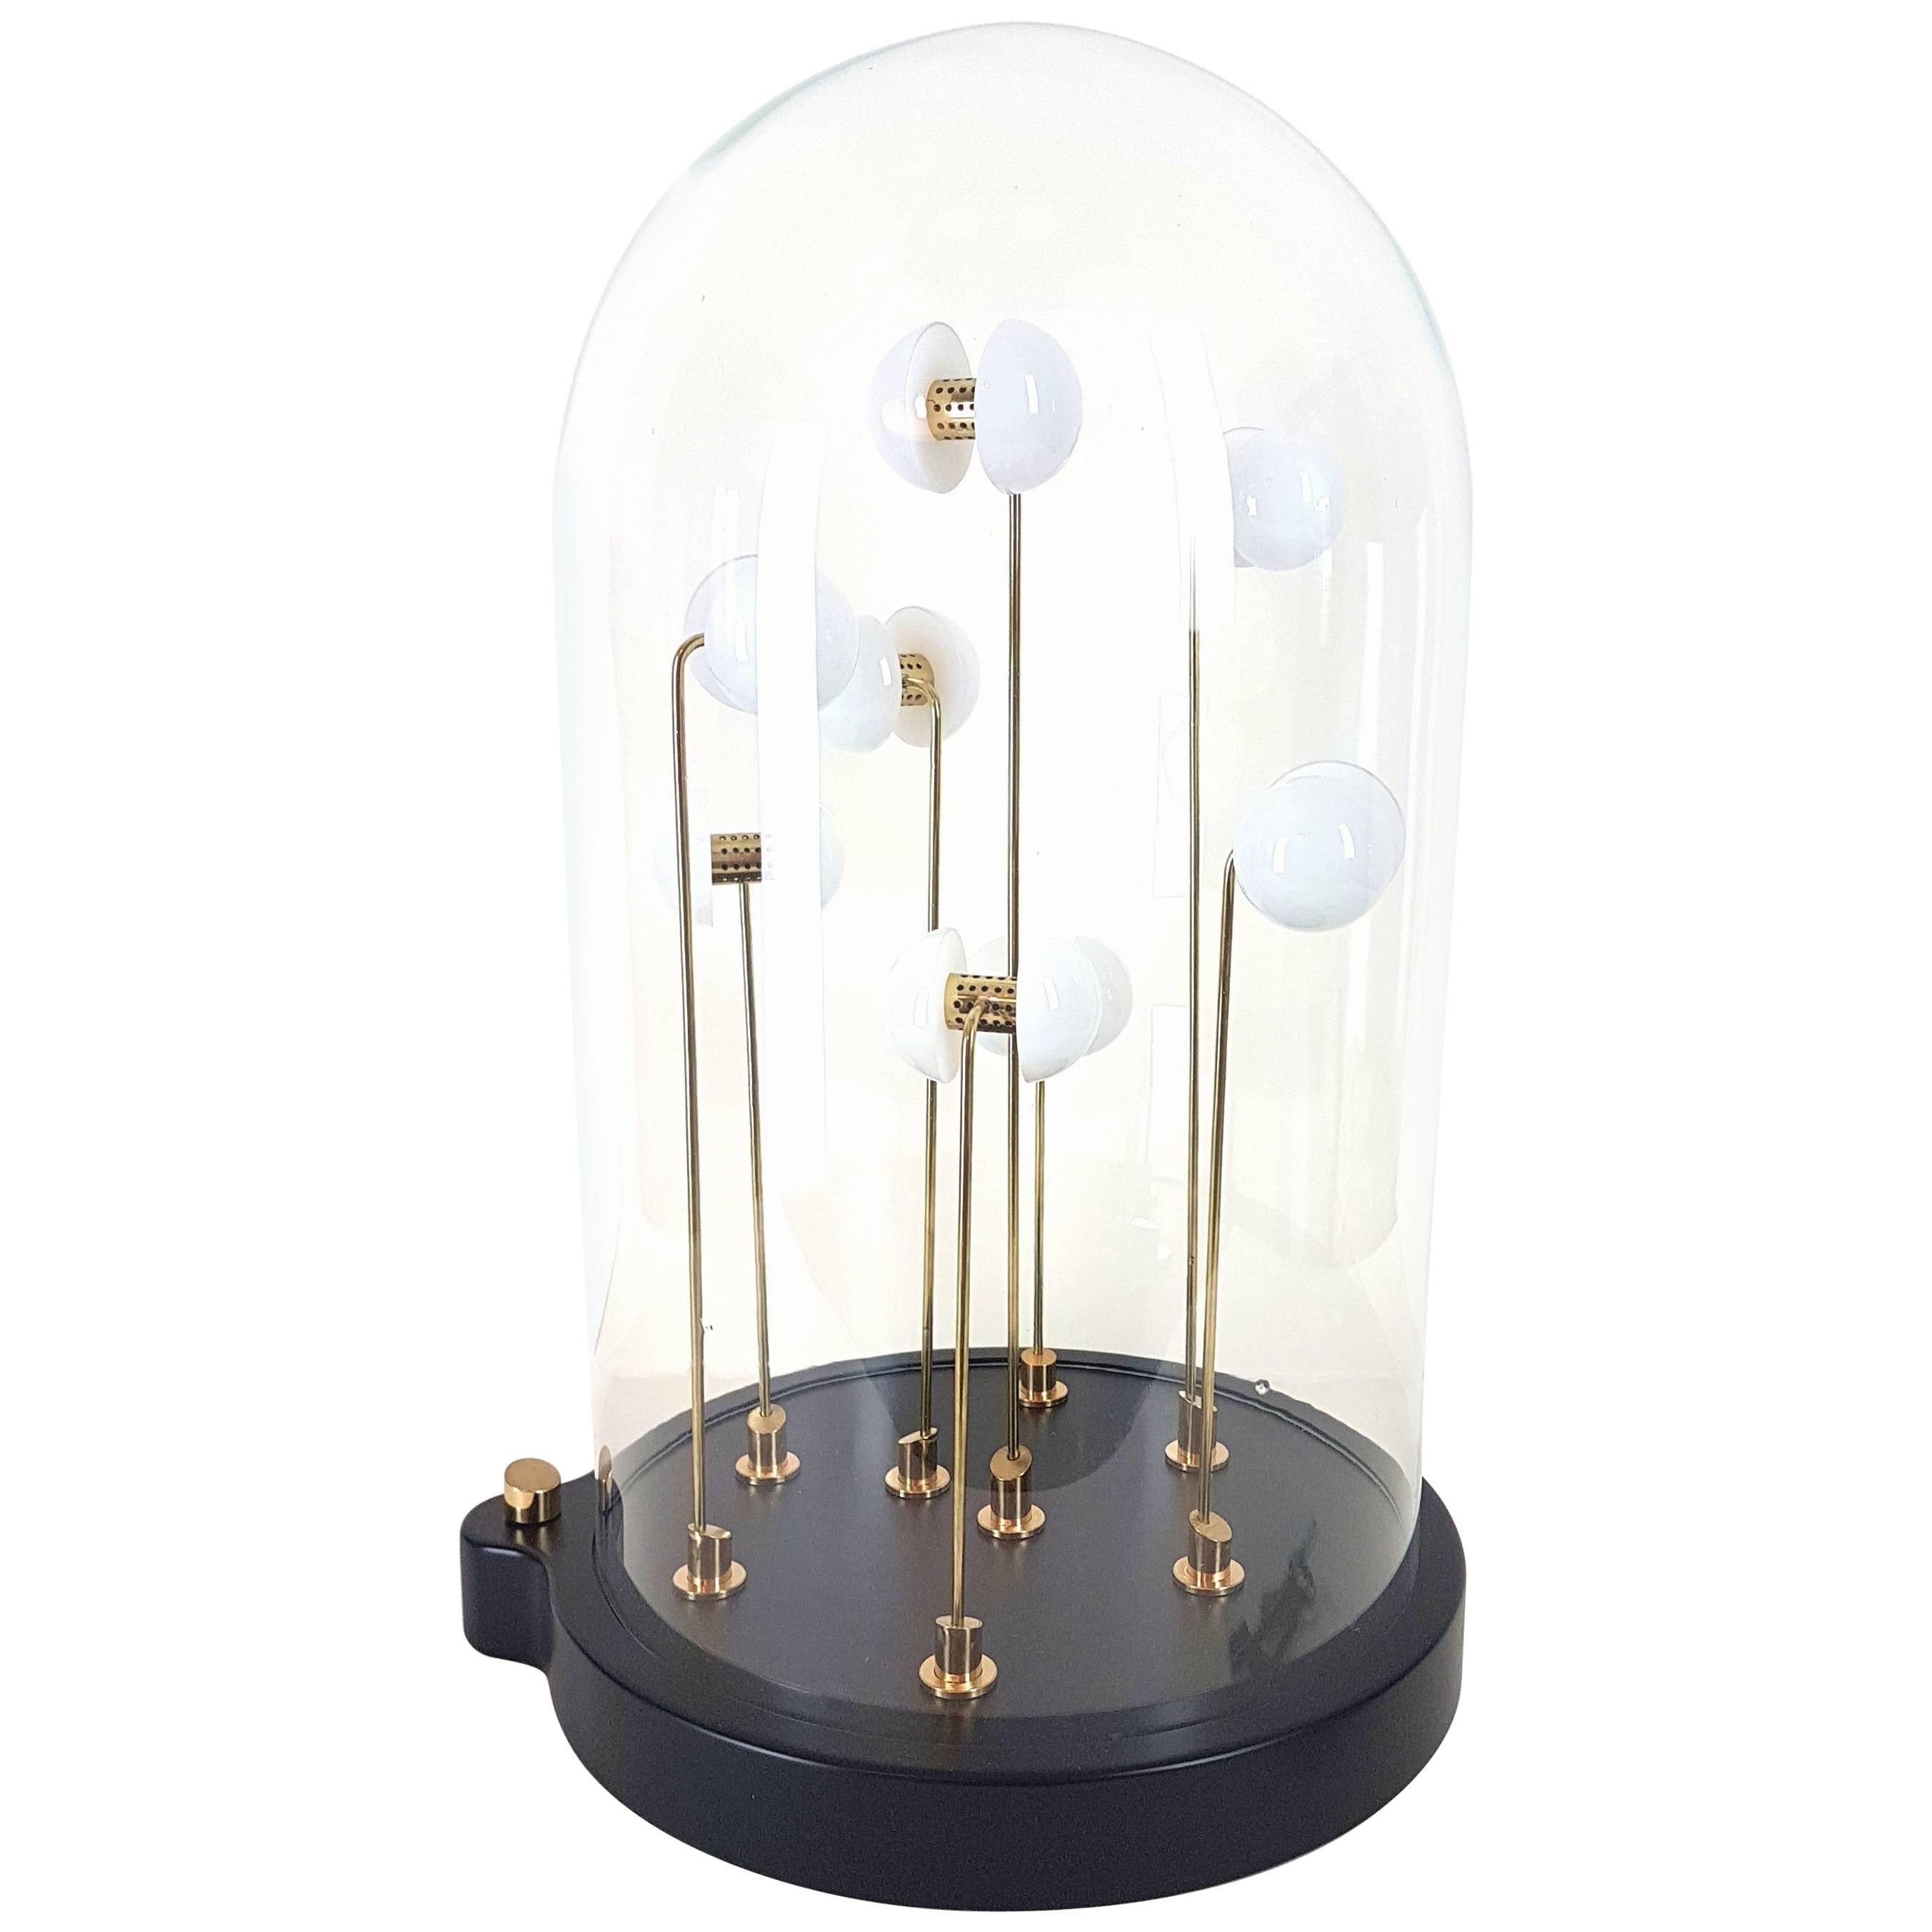 Germes de Lux, Black and Brass by Thierry Toutin, in Stock